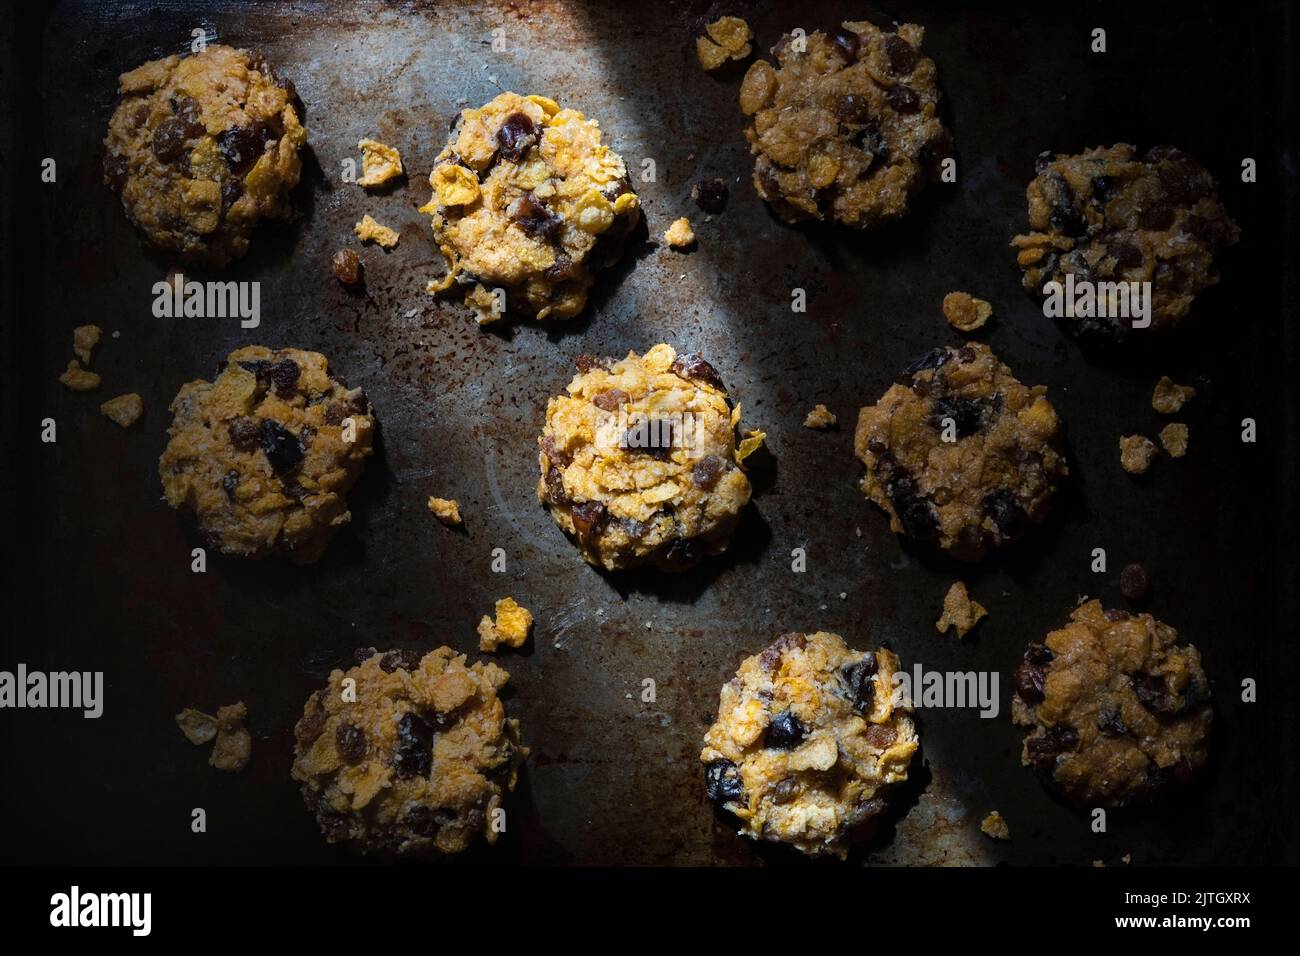 Corn flake and date cookies on a baking tray in light and shadow. Stock Photo